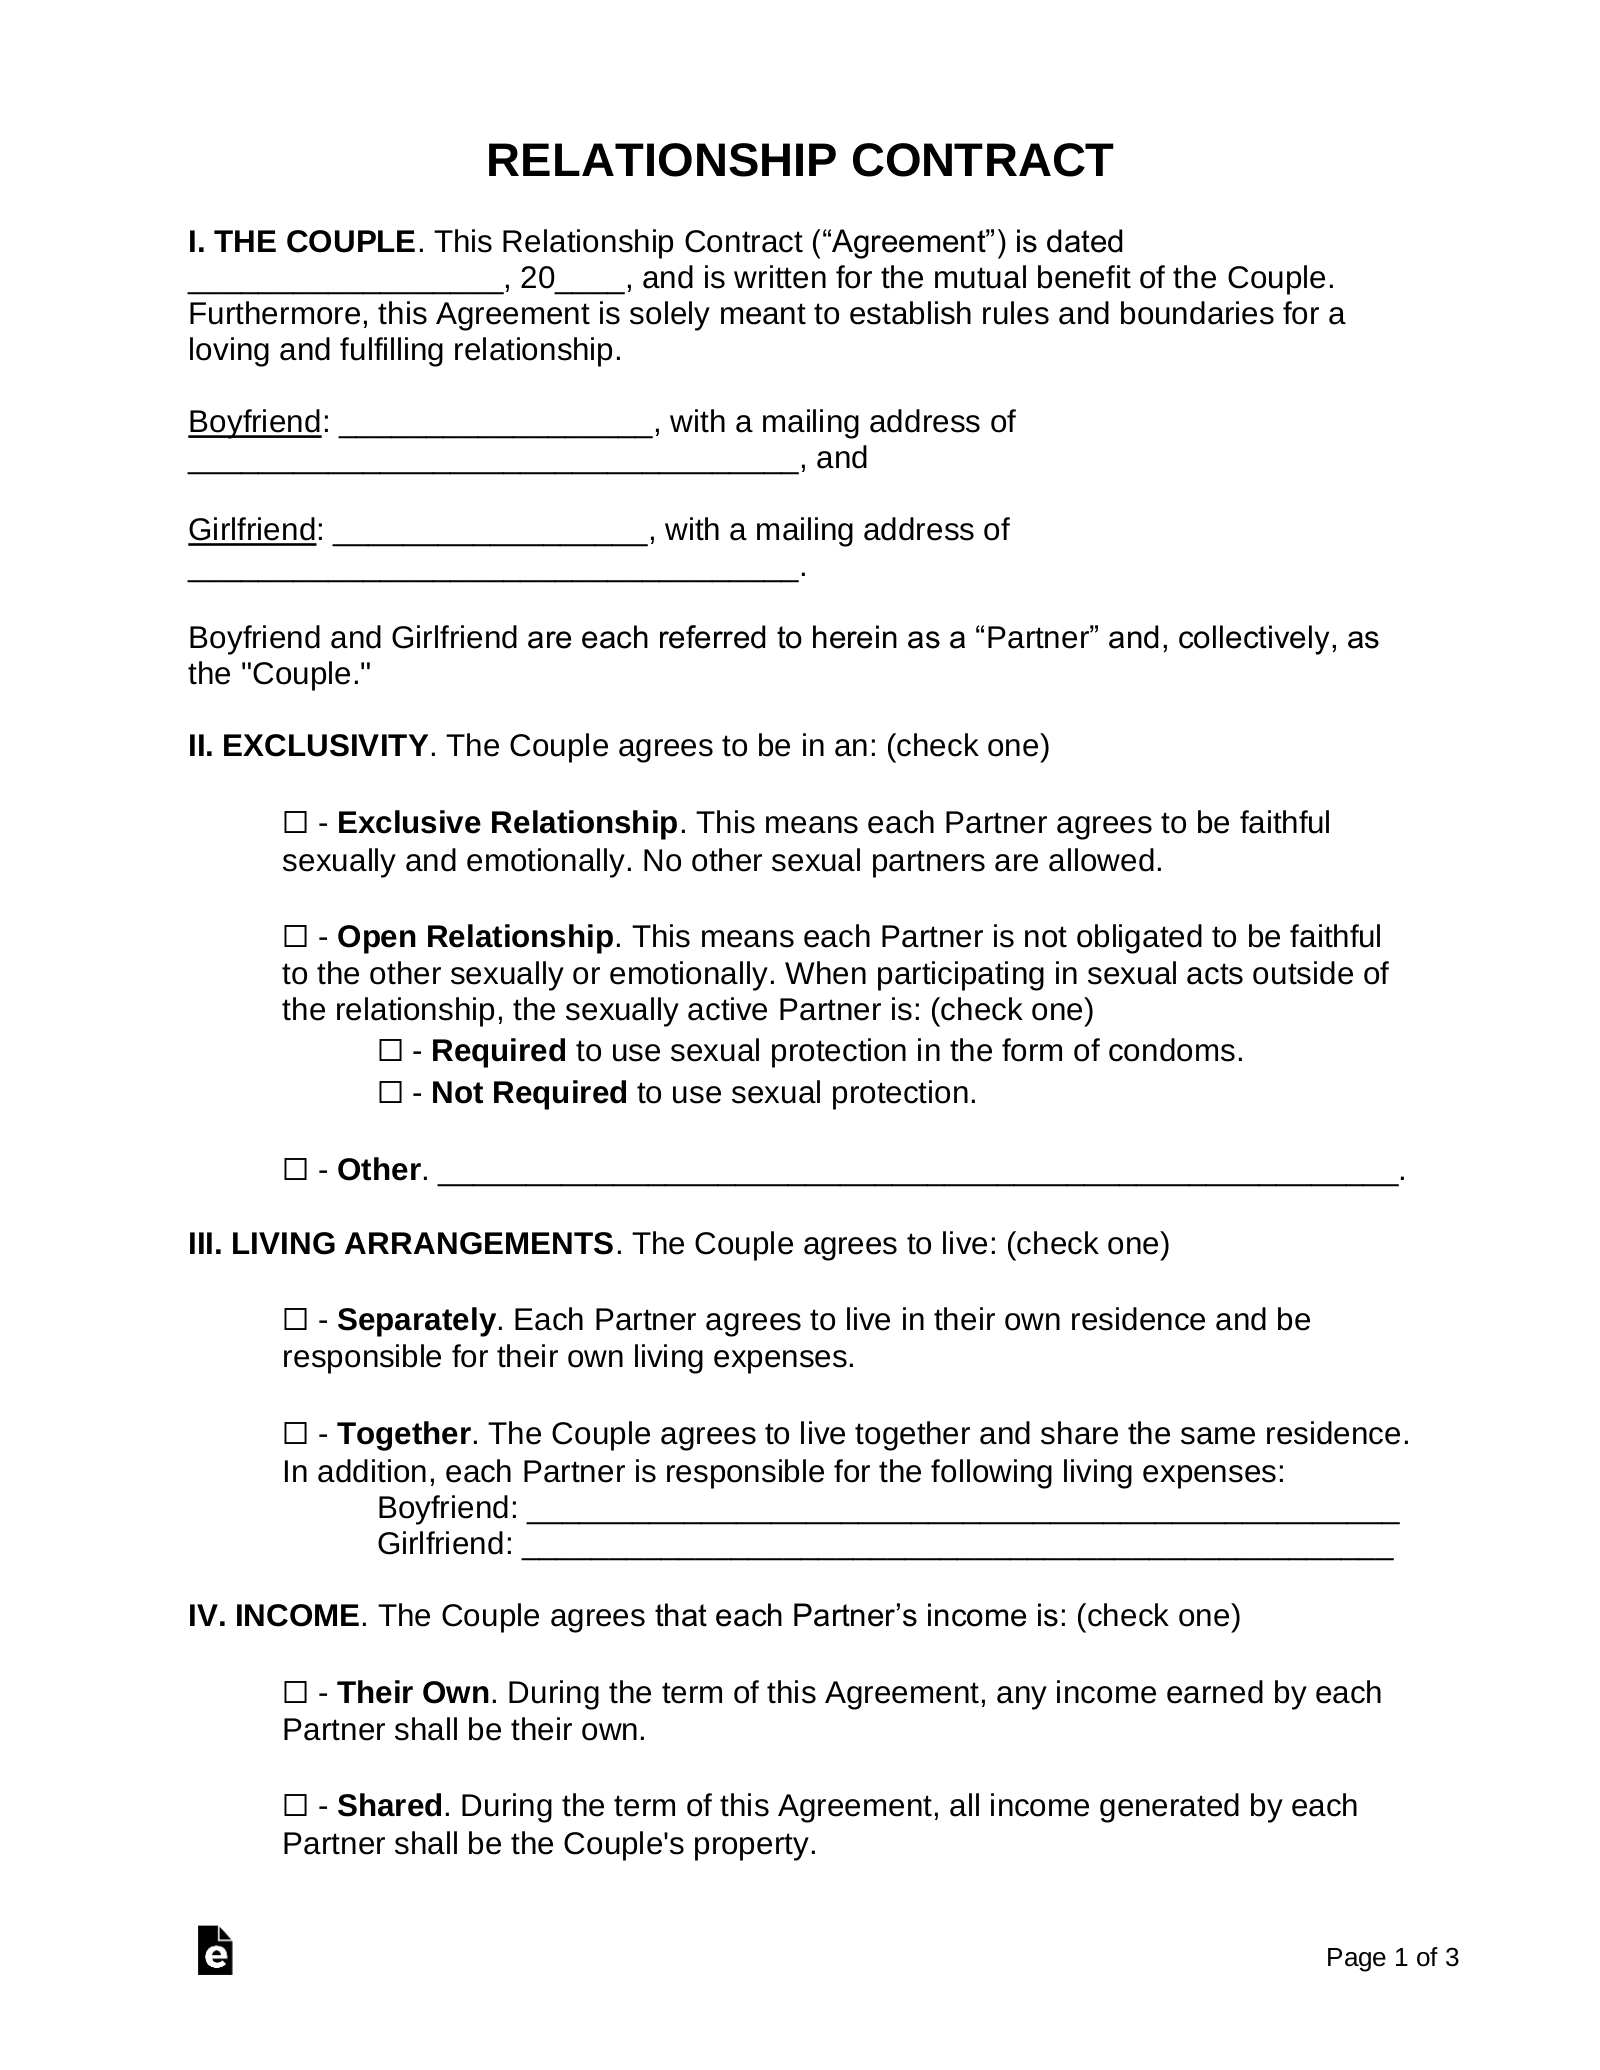 Relationship Contract Template